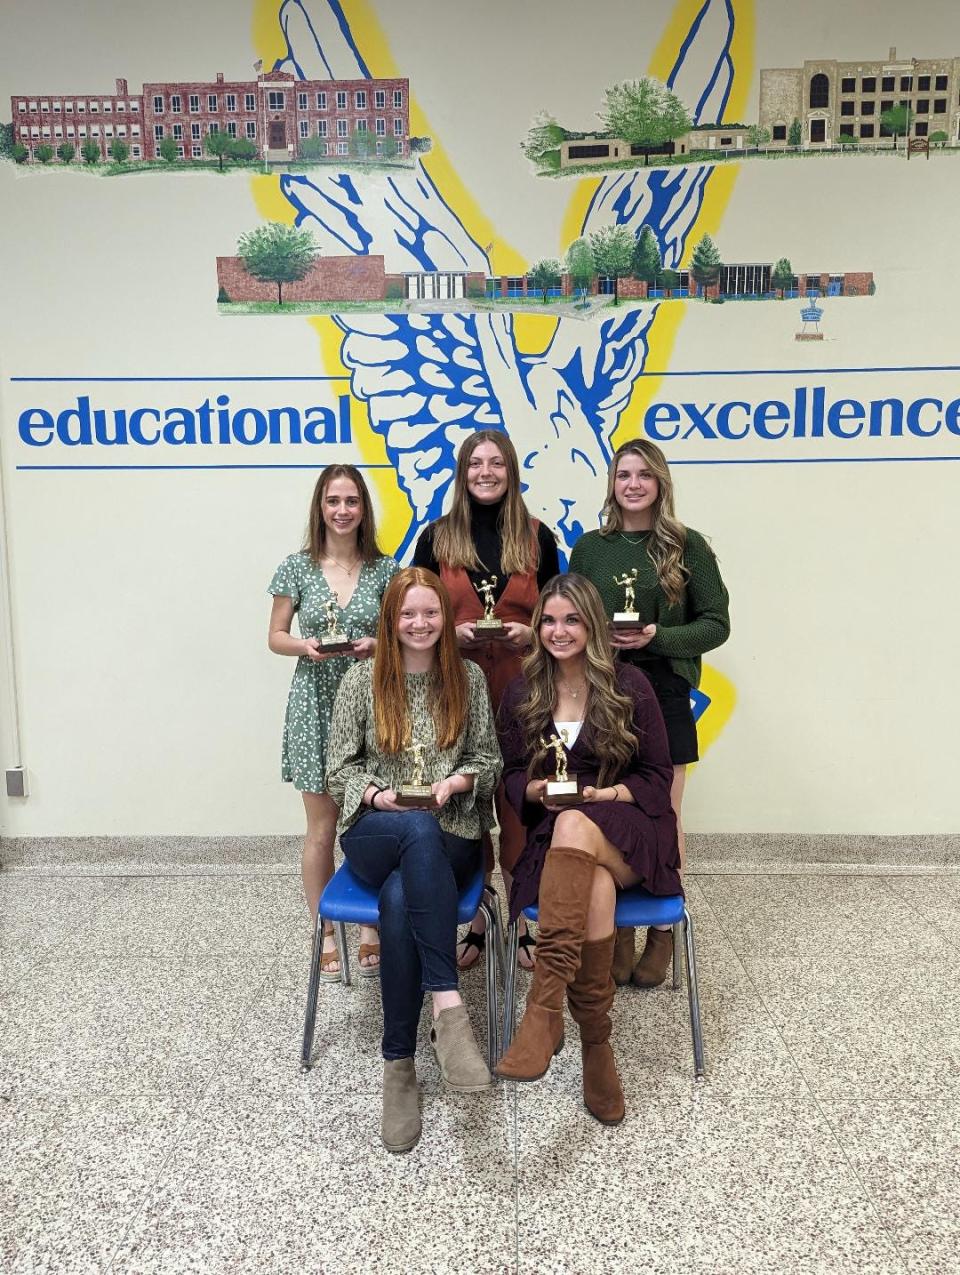 Hillsdale High School recently held a banquet to honor its fall sports athletes. Volleyball Special Awards went to, from left: (front) Emily McGovern, Taylor Morgan; (back) Jacey Sermulis, Isabella Dalton, Ally Morgan